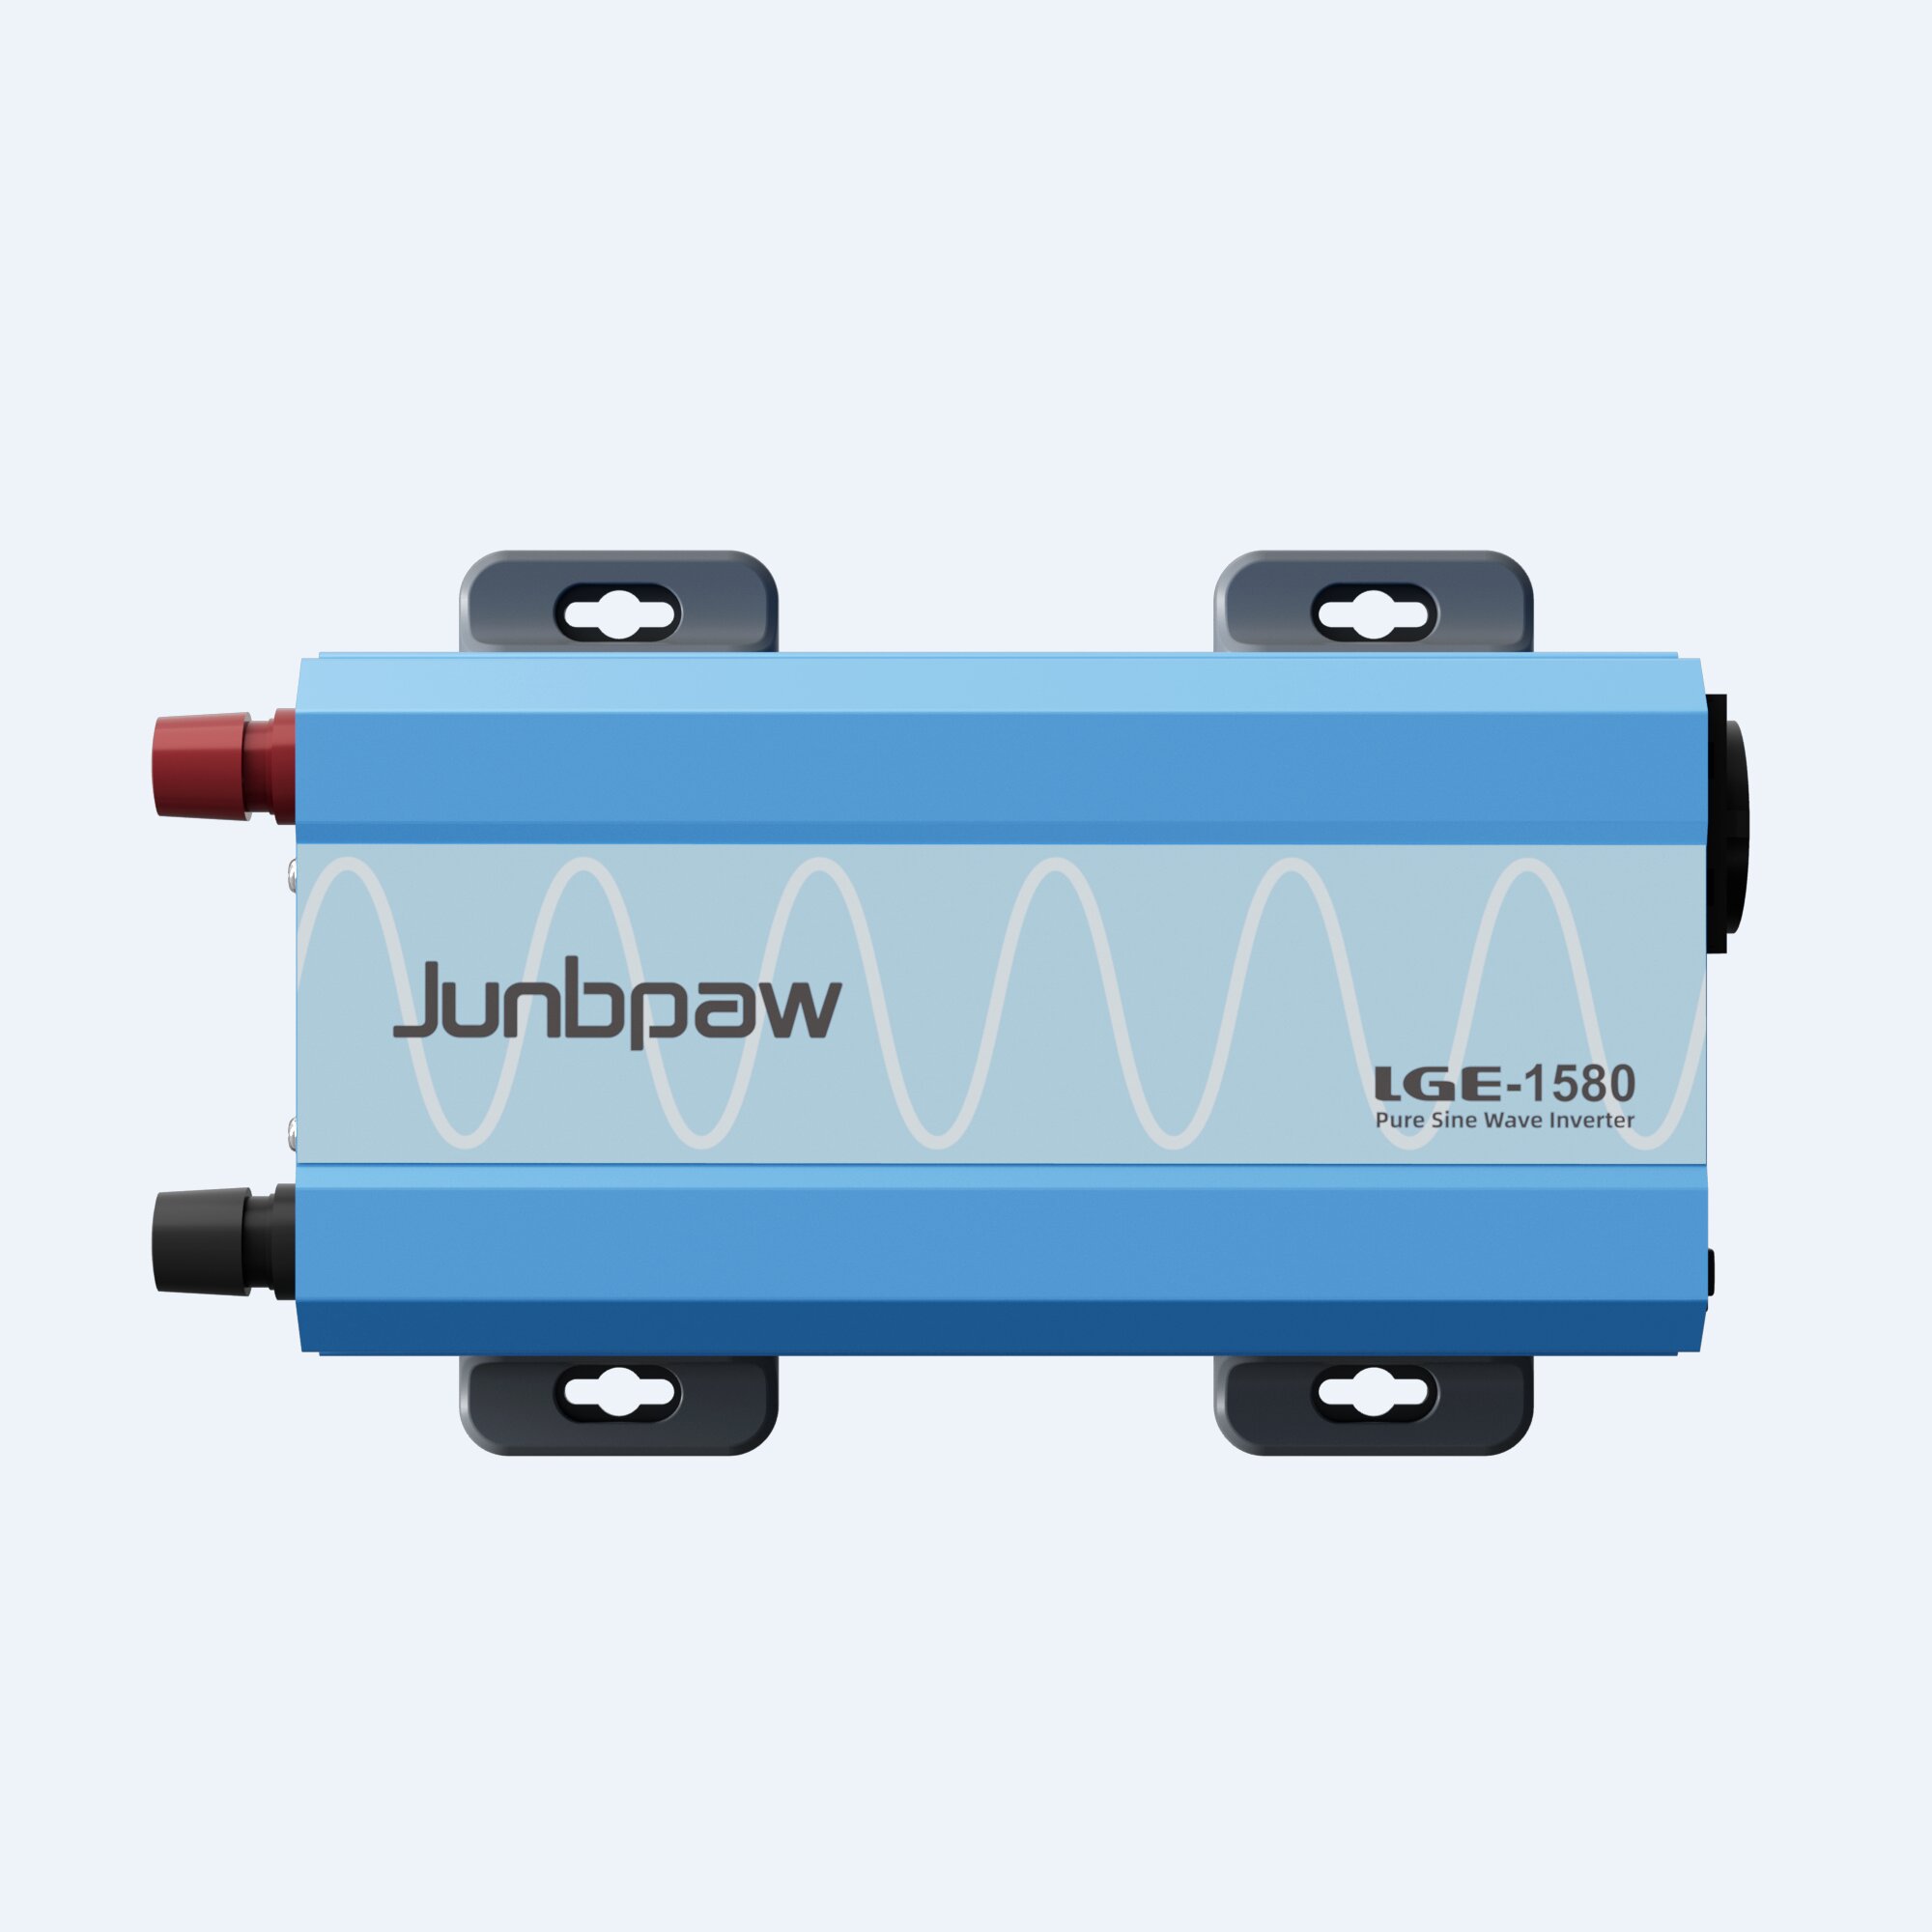 Junbpaw 1500W Pure sine wave inverter with Intelligent frequency switch